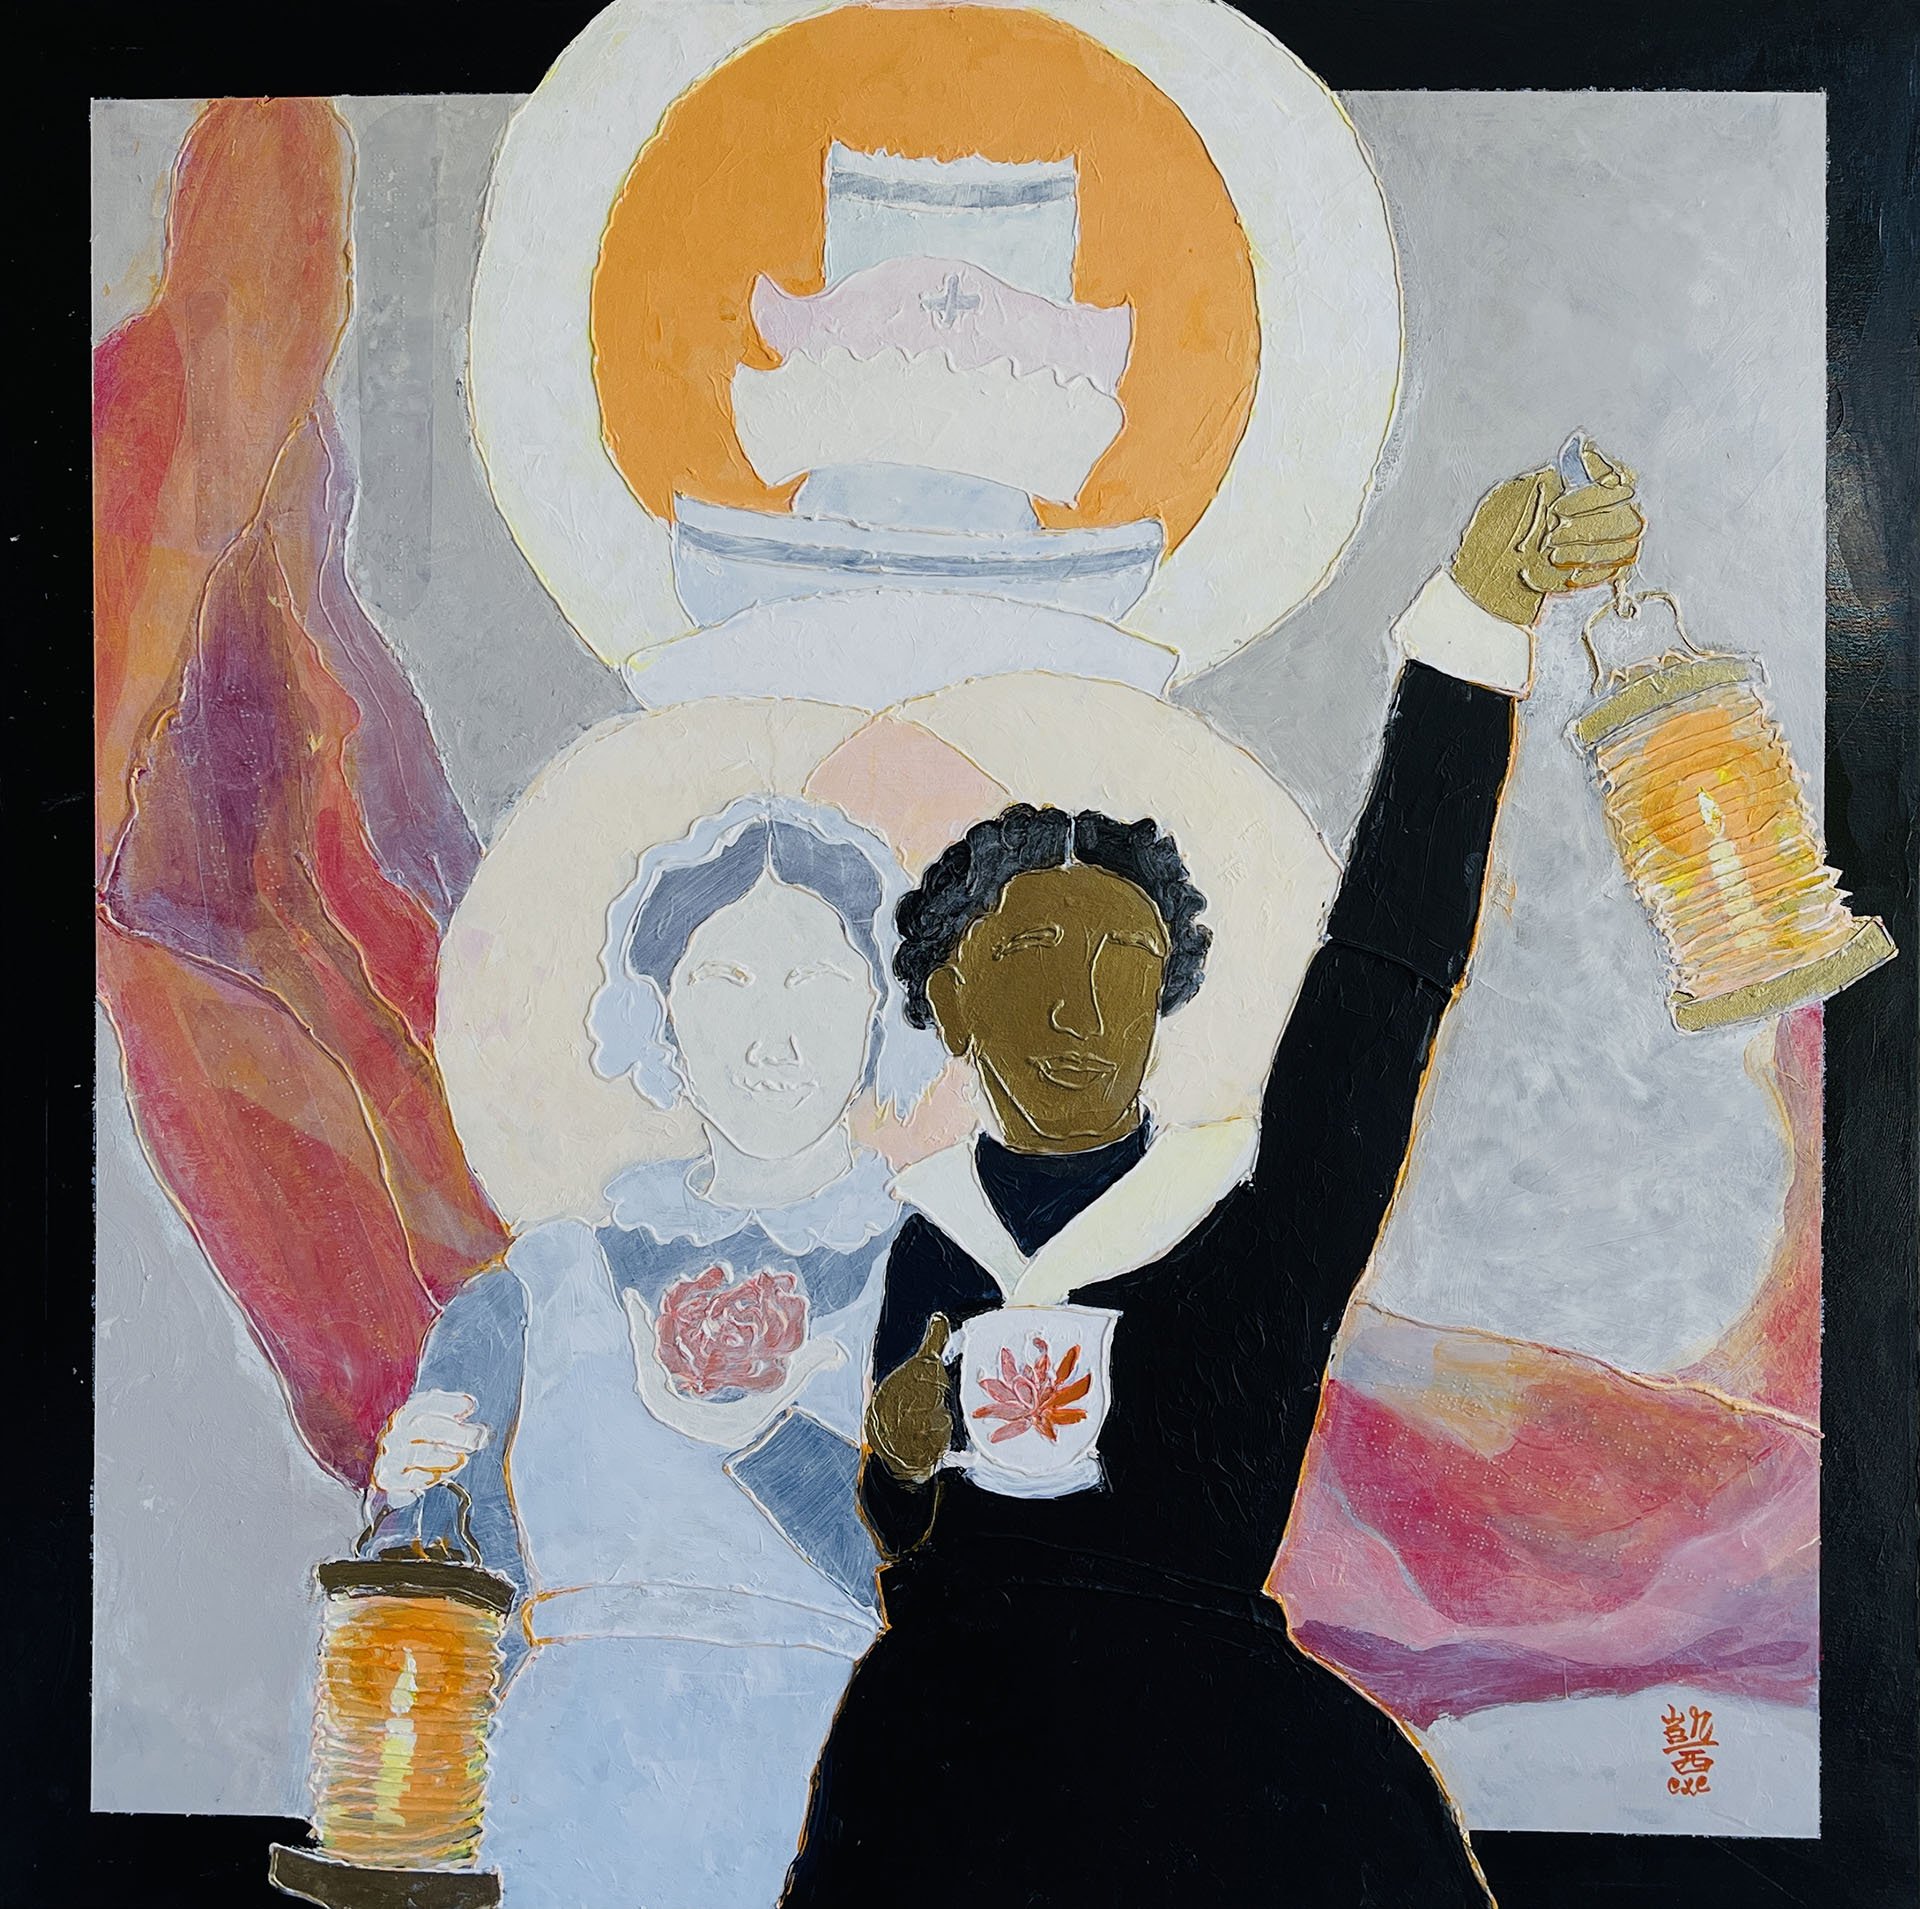 Catherine Lecce-Chong, Bone Black and Lyla’s White: Two Ladies with Lamps.  Acrylic paint on canvas. 36” x 36”